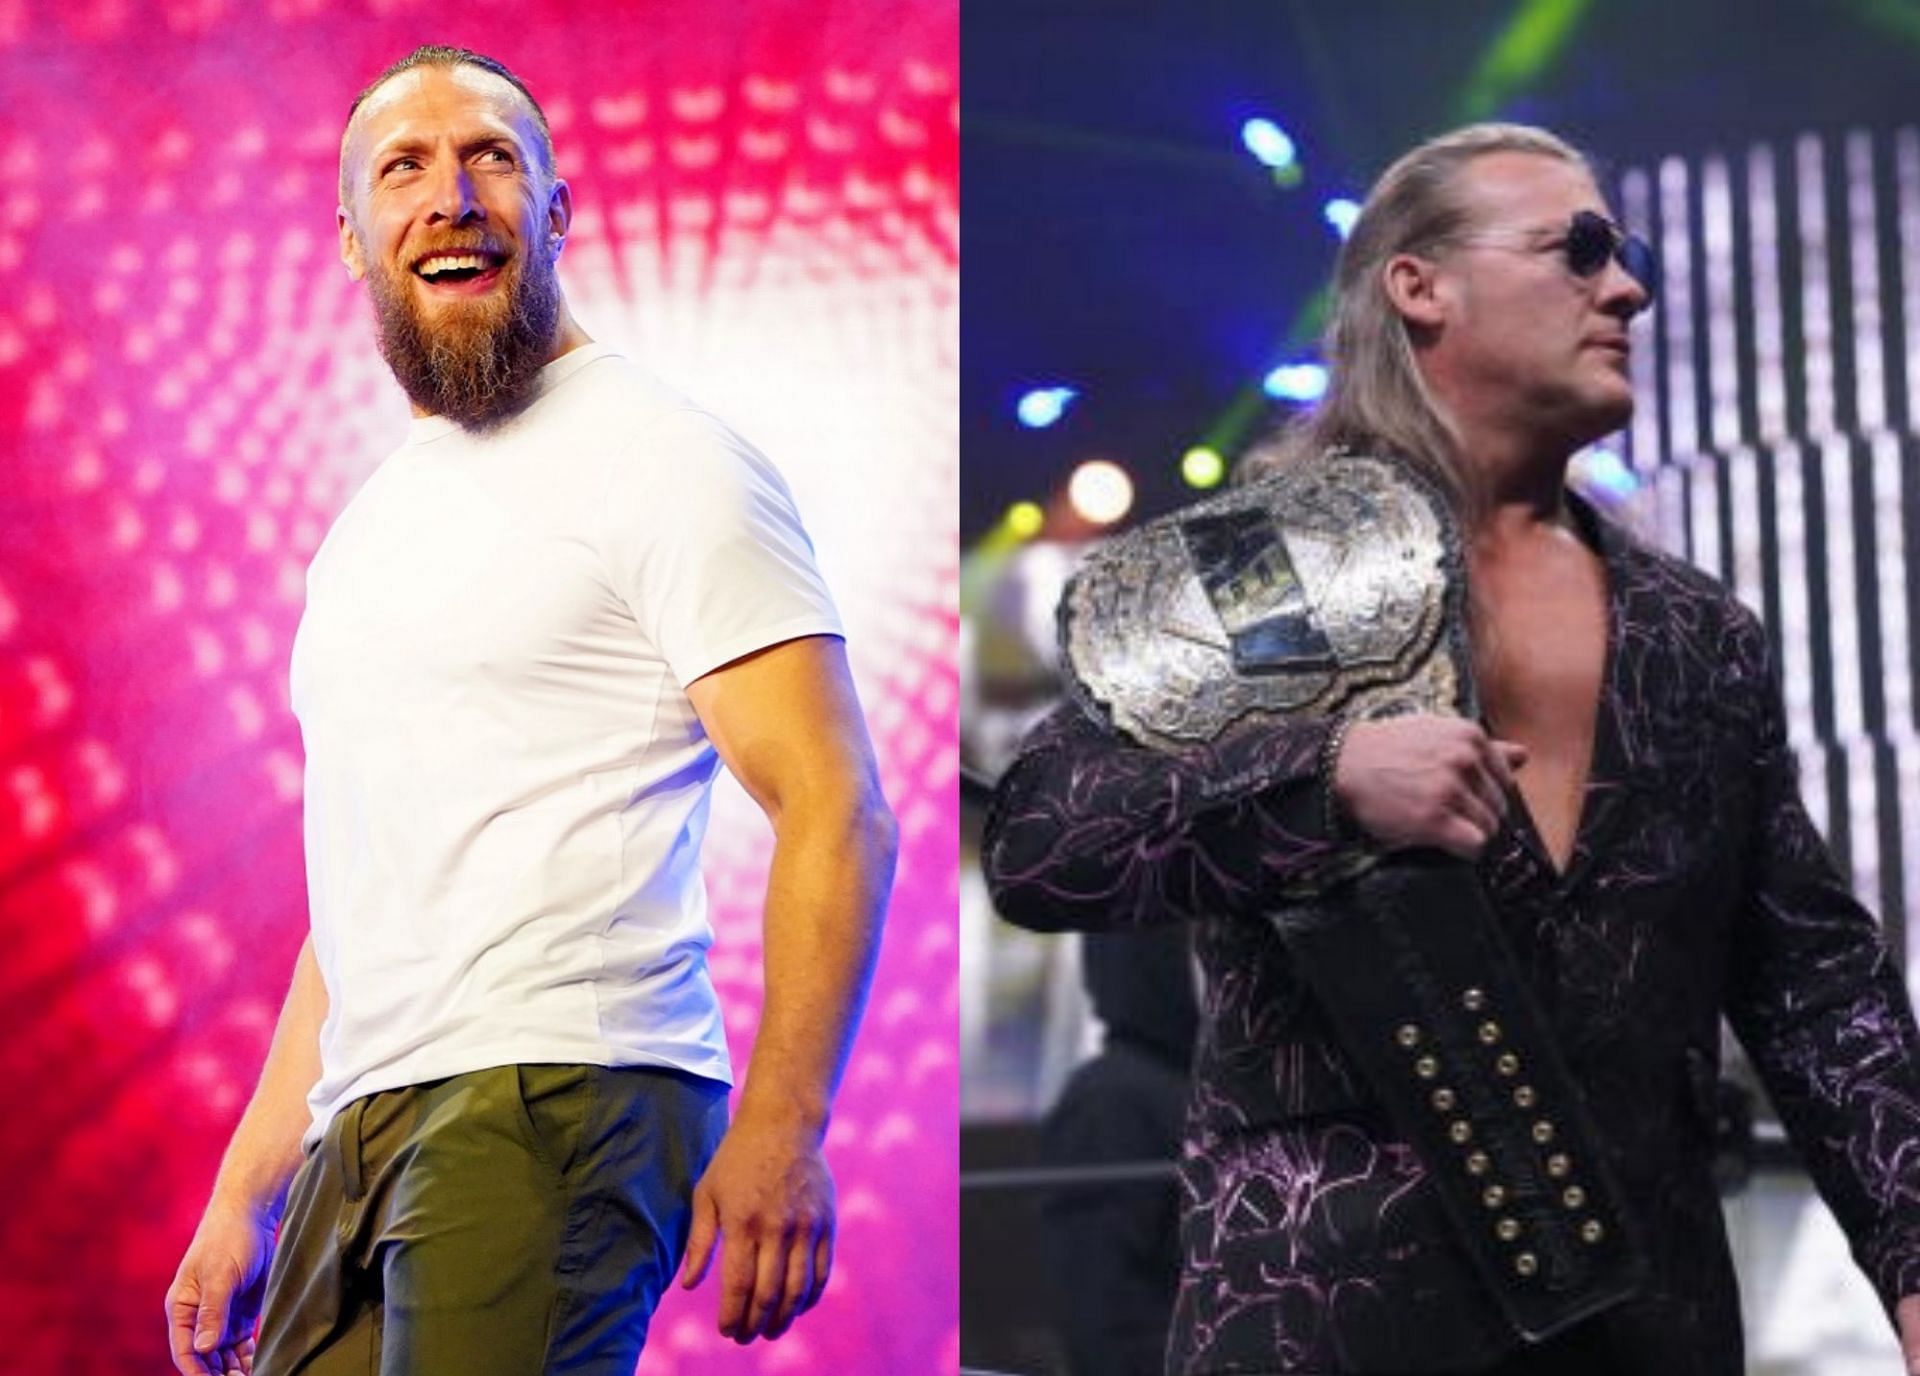 The signing of Bryan Danielson and Chris Jericho raised the popularity of AEW tremendously